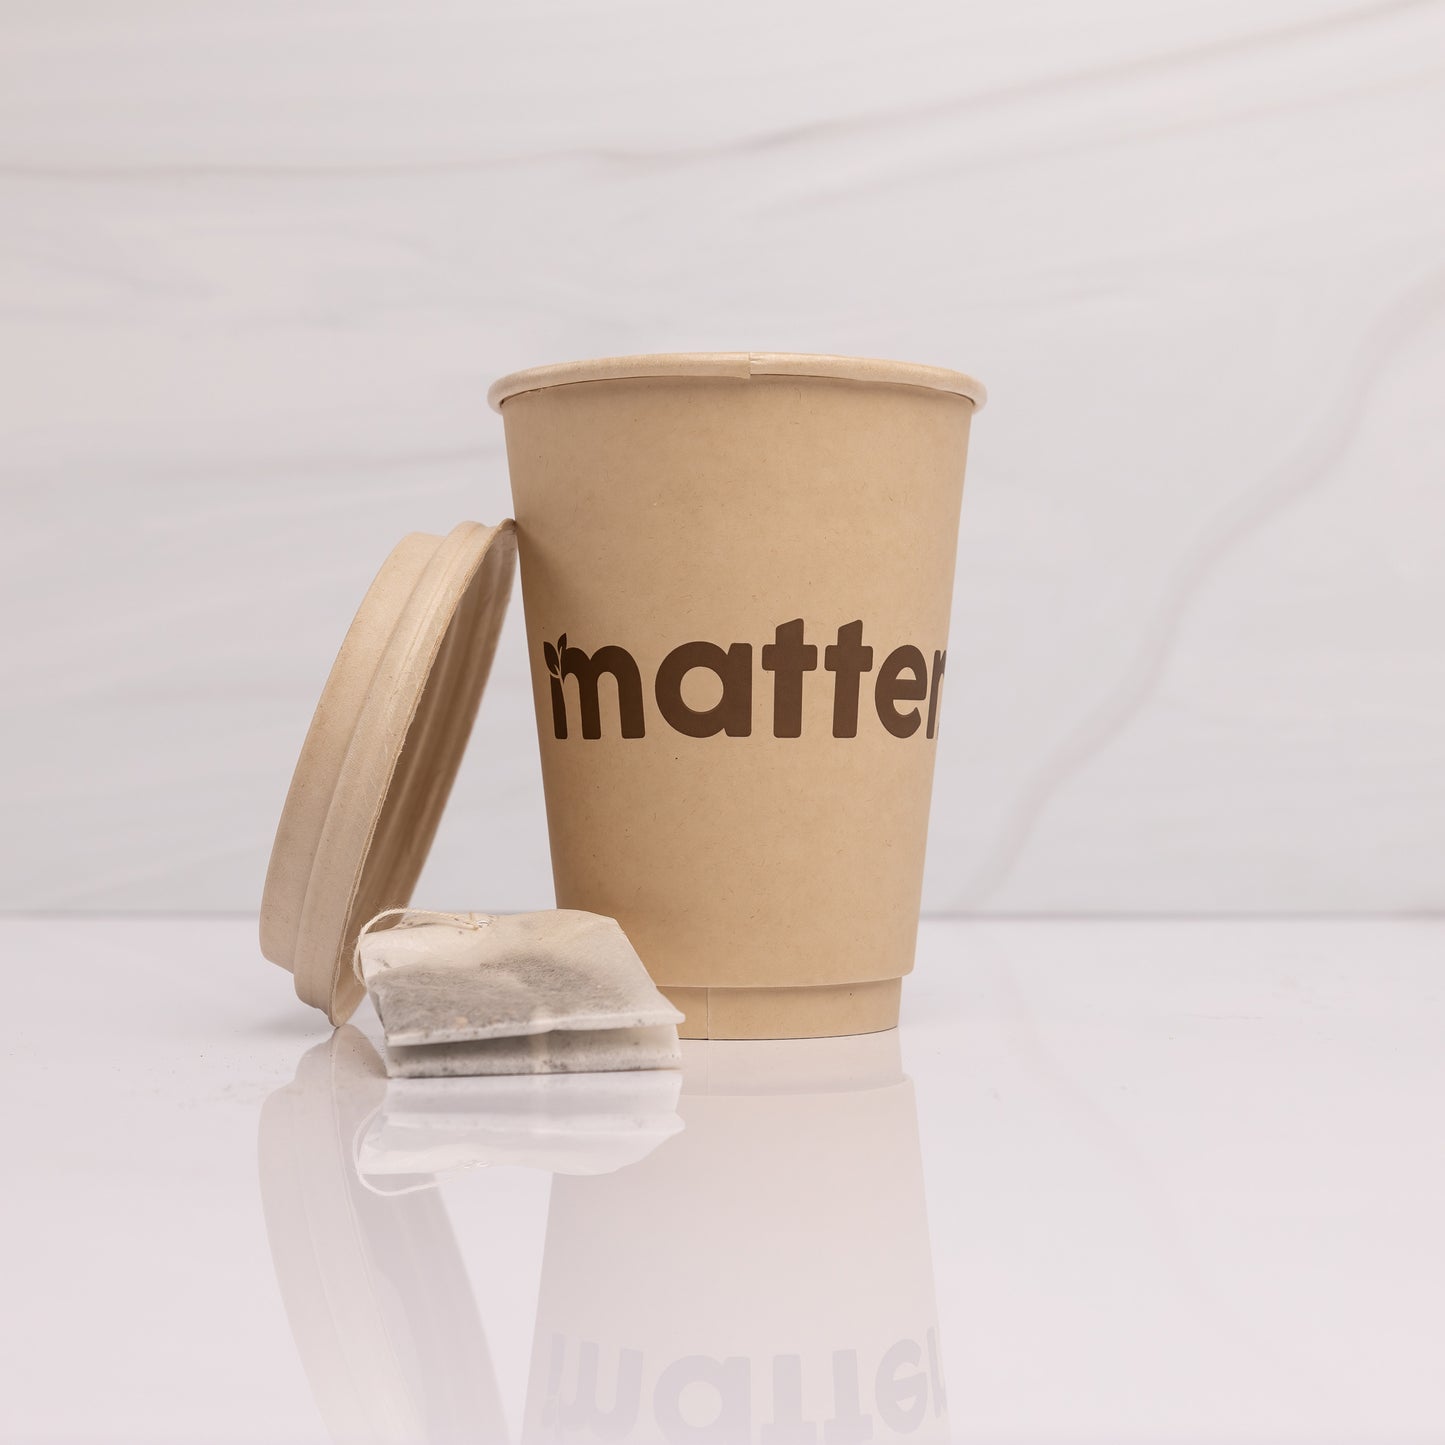 Matter Compostable Hot 12oz Cups with Lids - 10 Count